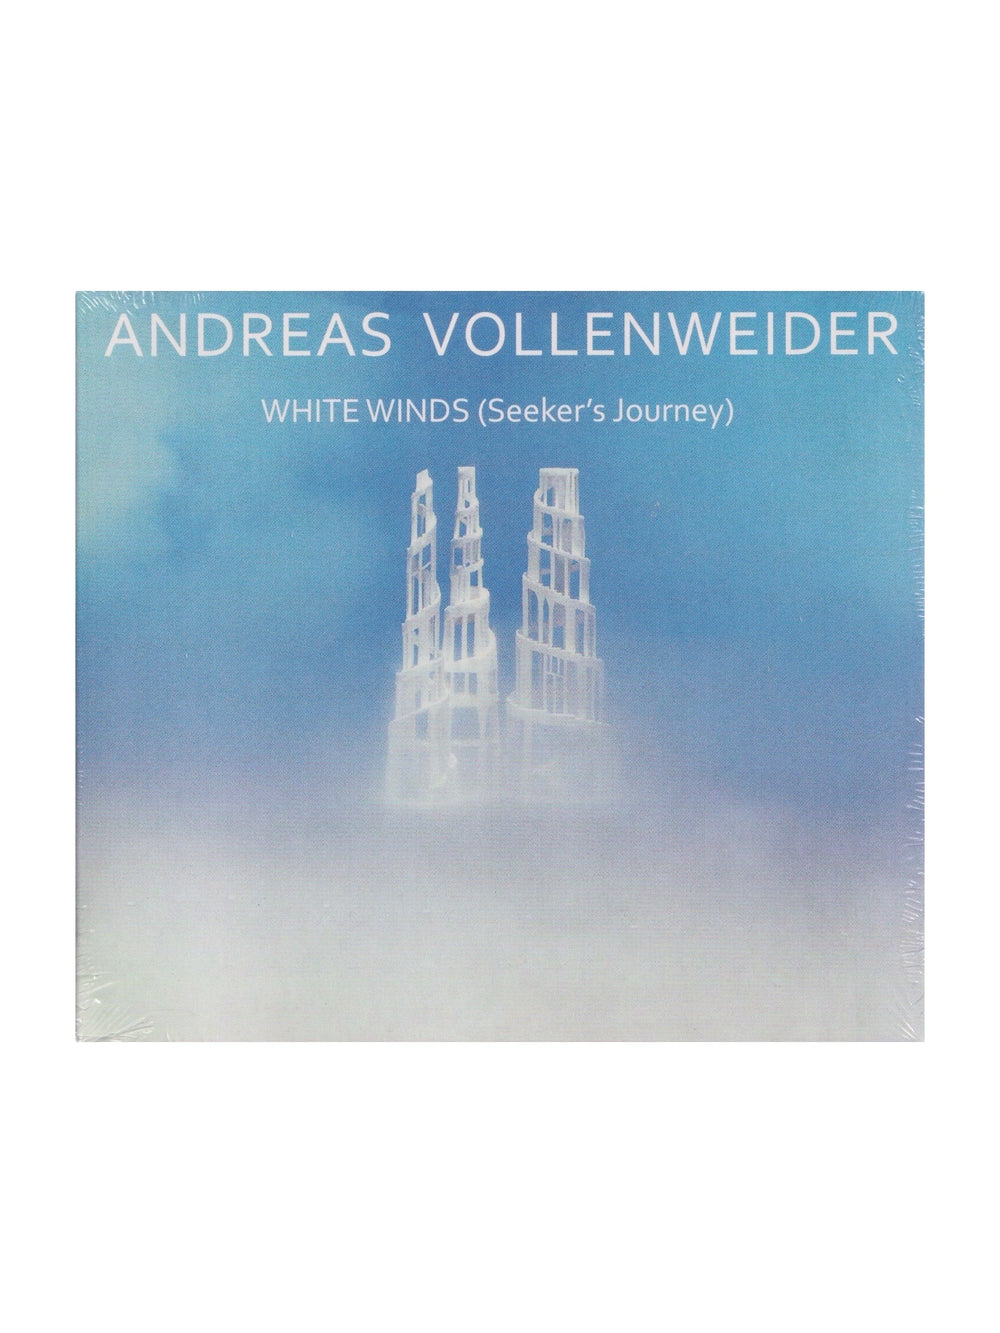 Prince – Andreas Vollenweider – White Winds (Seeker's Journey) CD Album Germany NEW: 2020